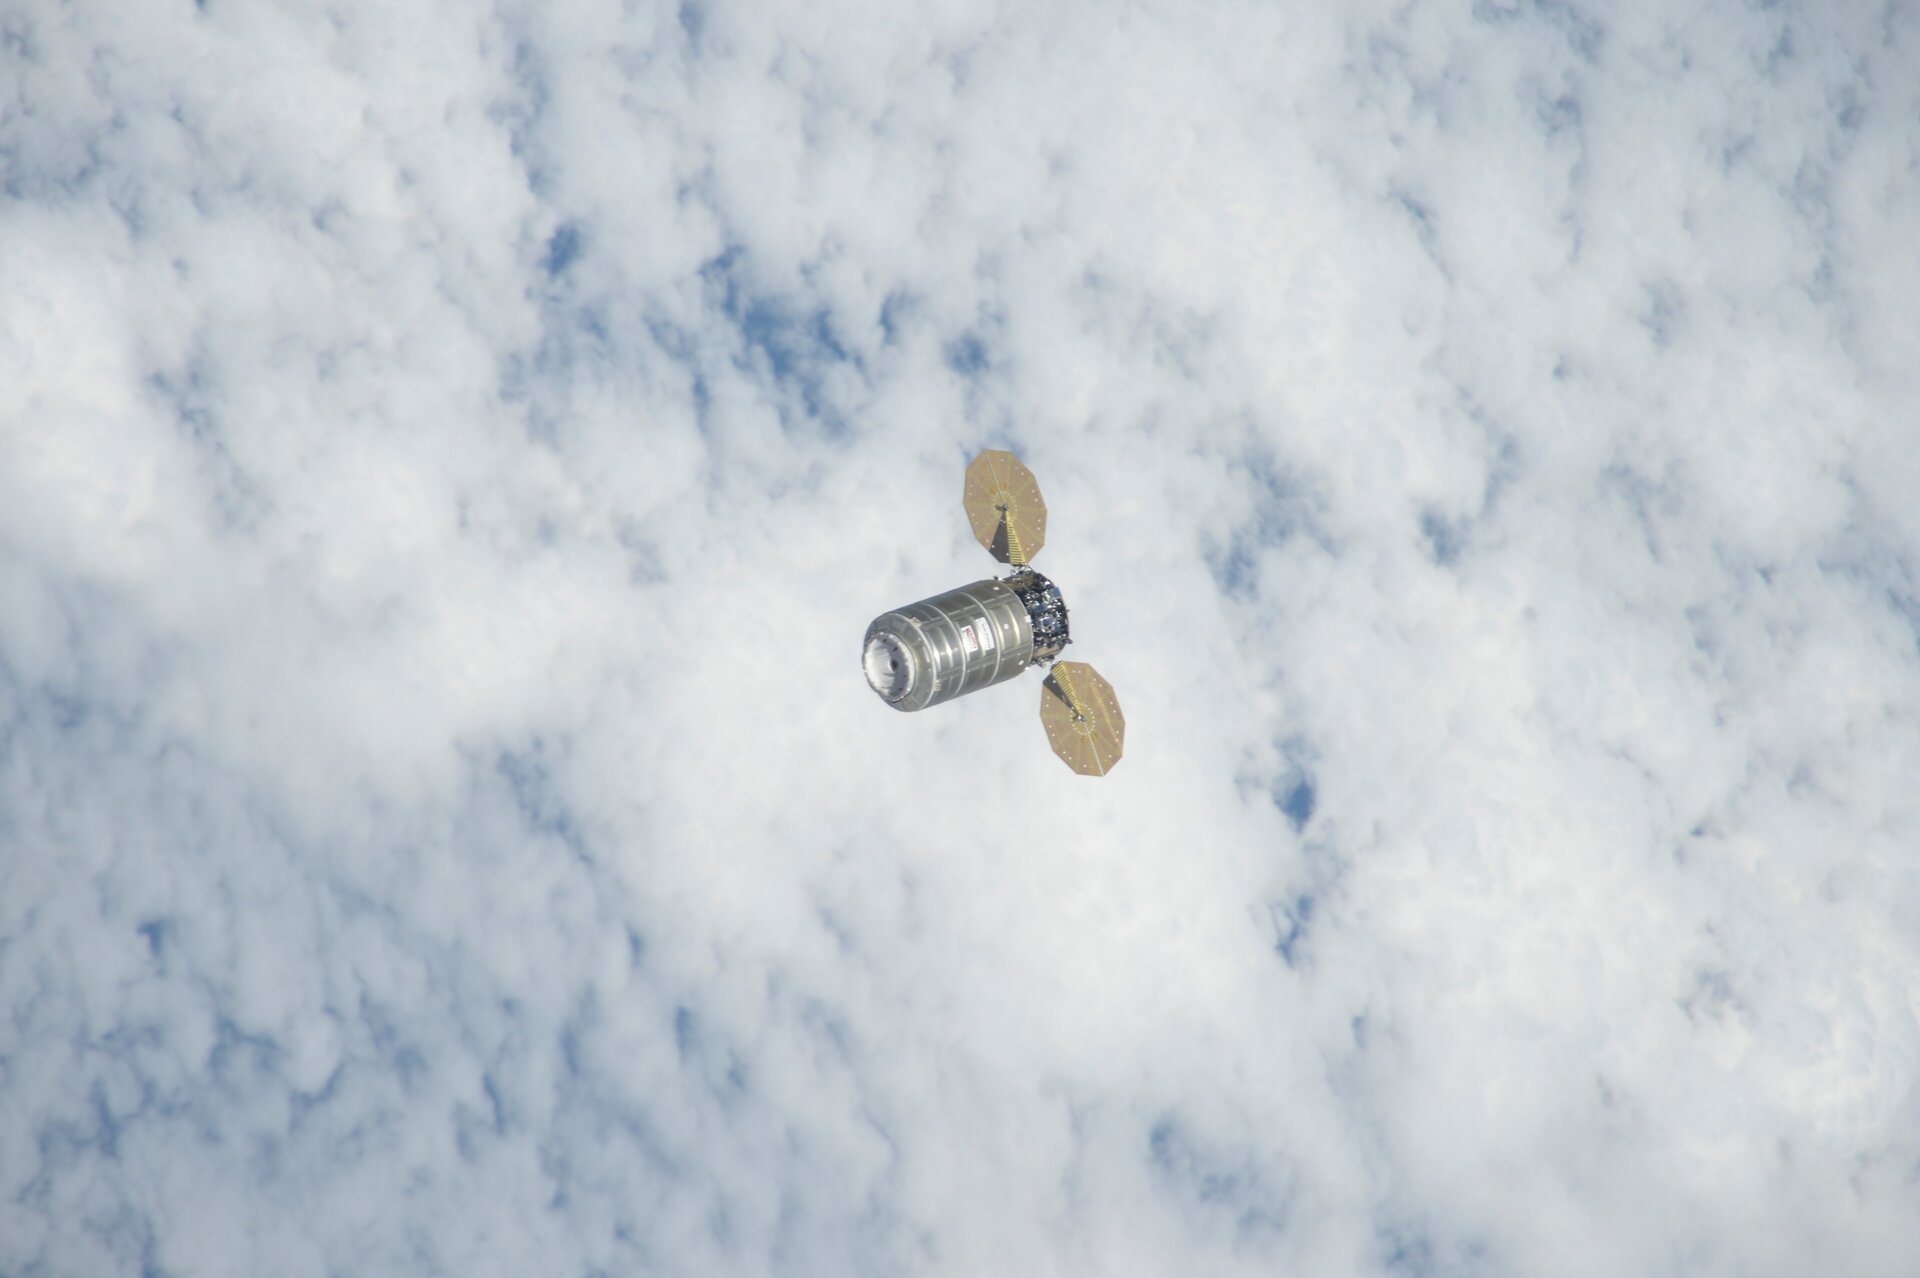 Cygnus supply spacecraft approaches Station